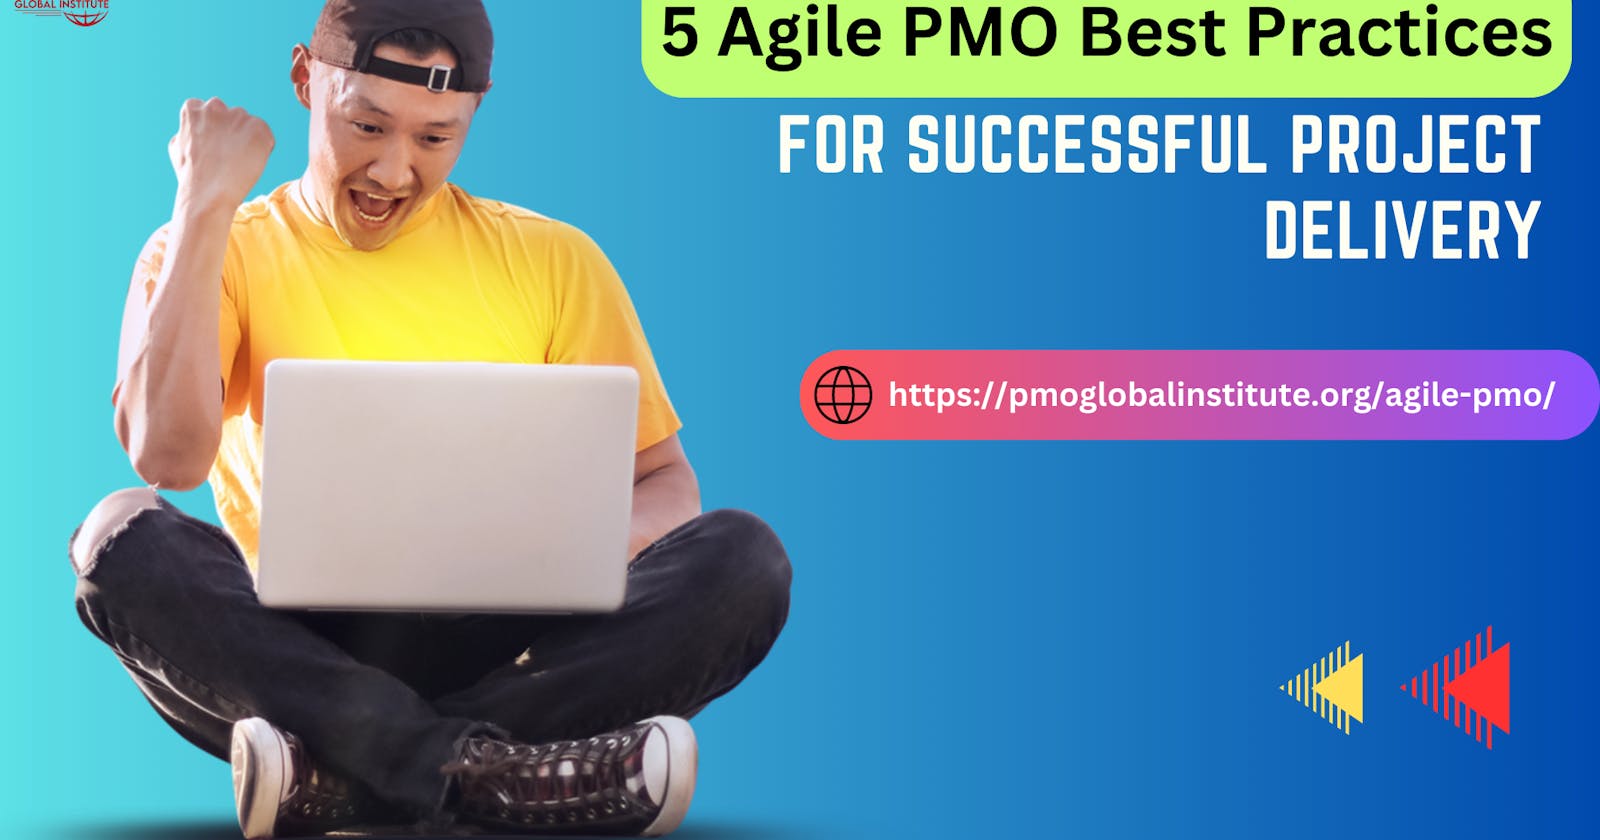 5 Agile PMO Best Practices for Successful Project Delivery